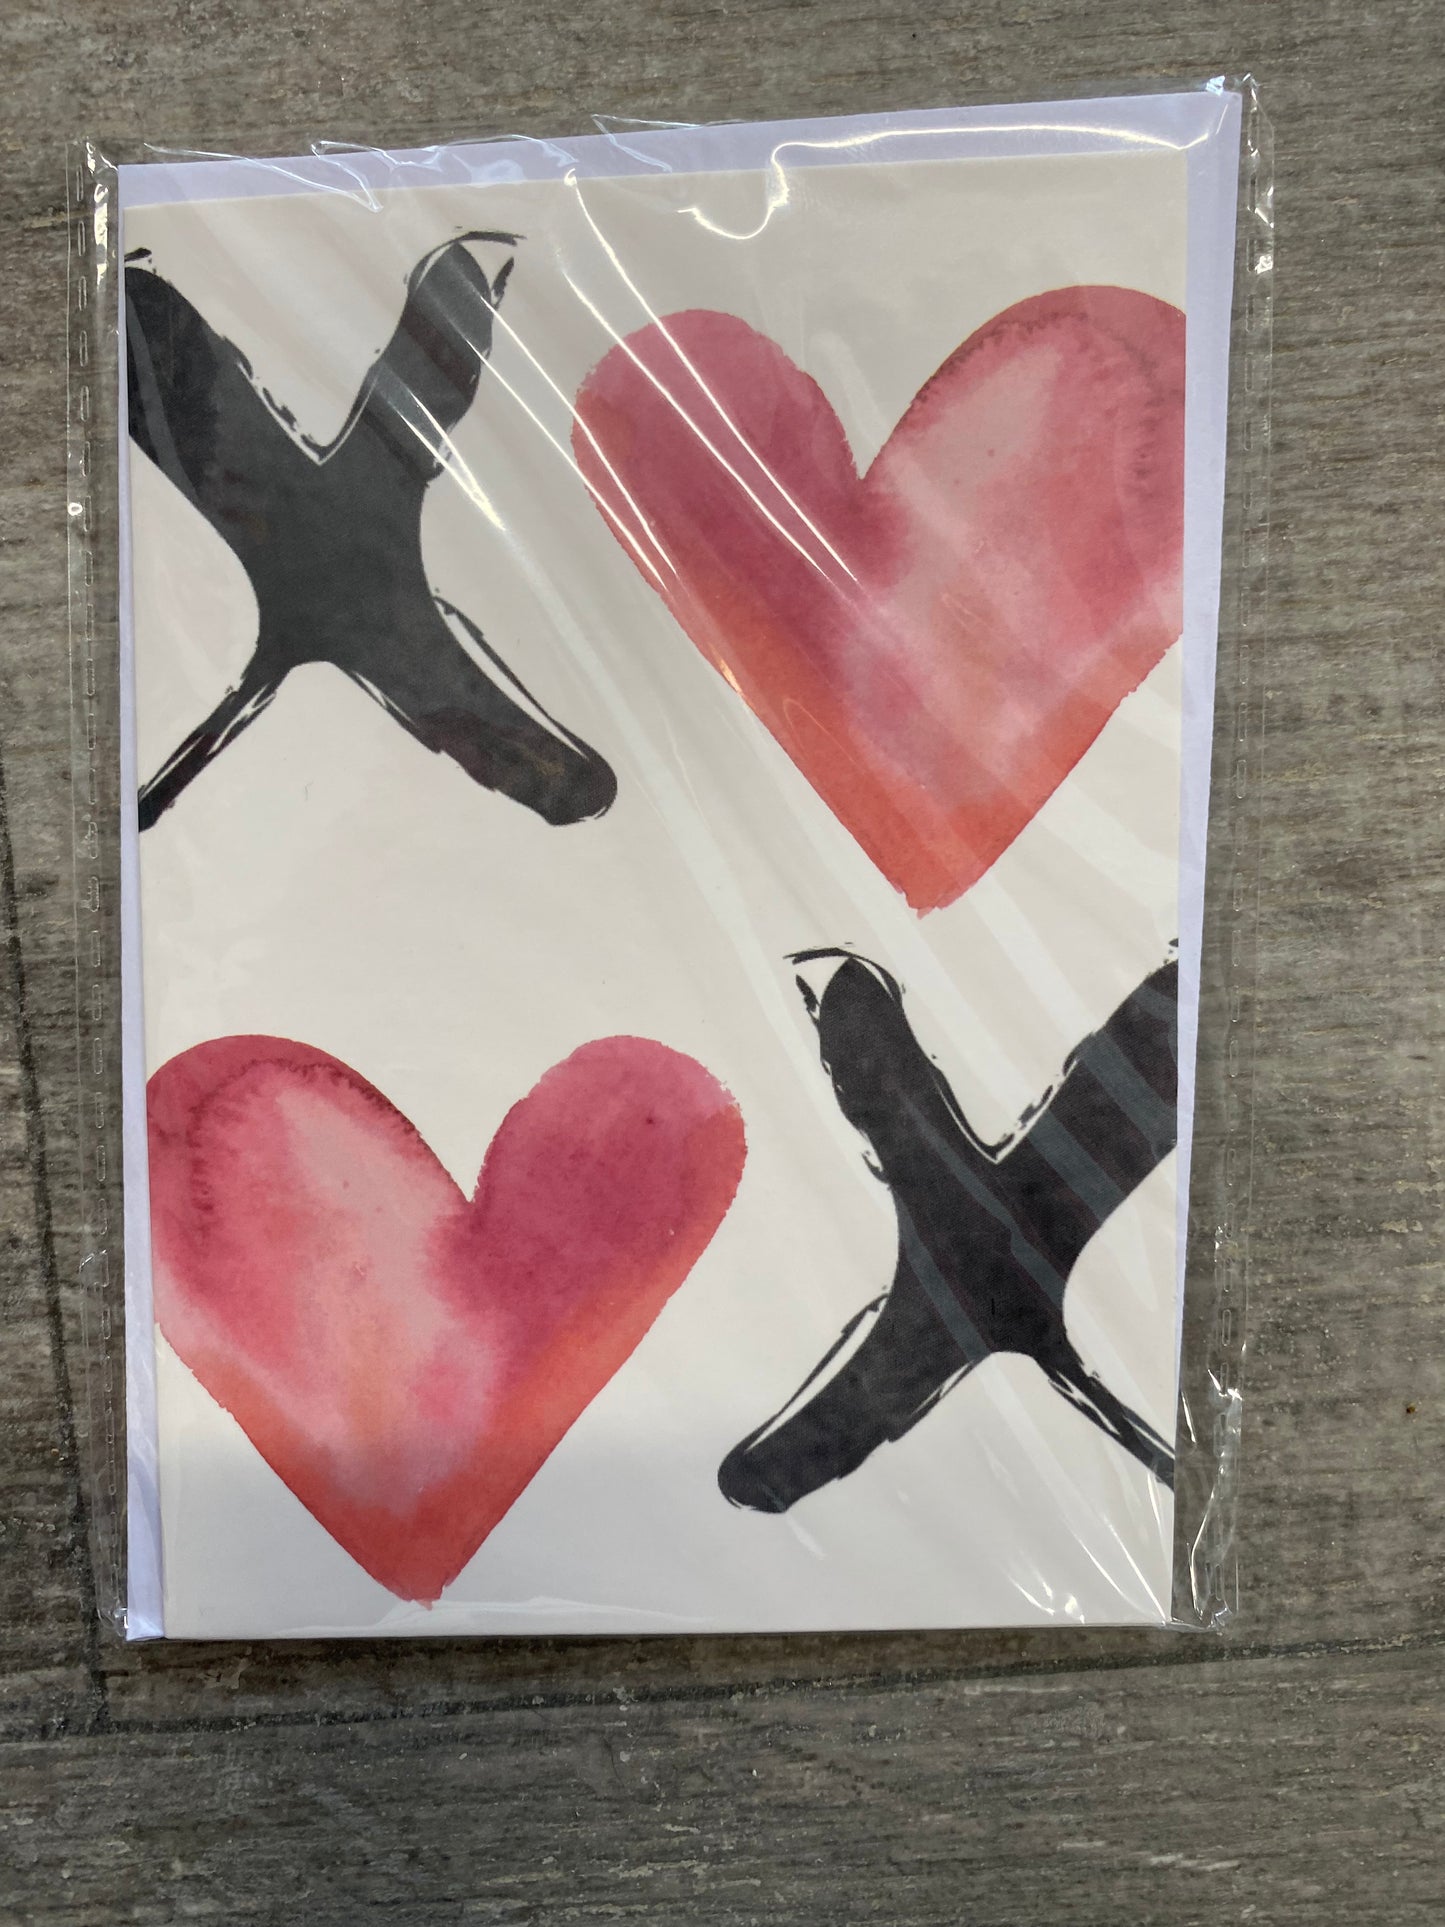 Romantic Themed Cards